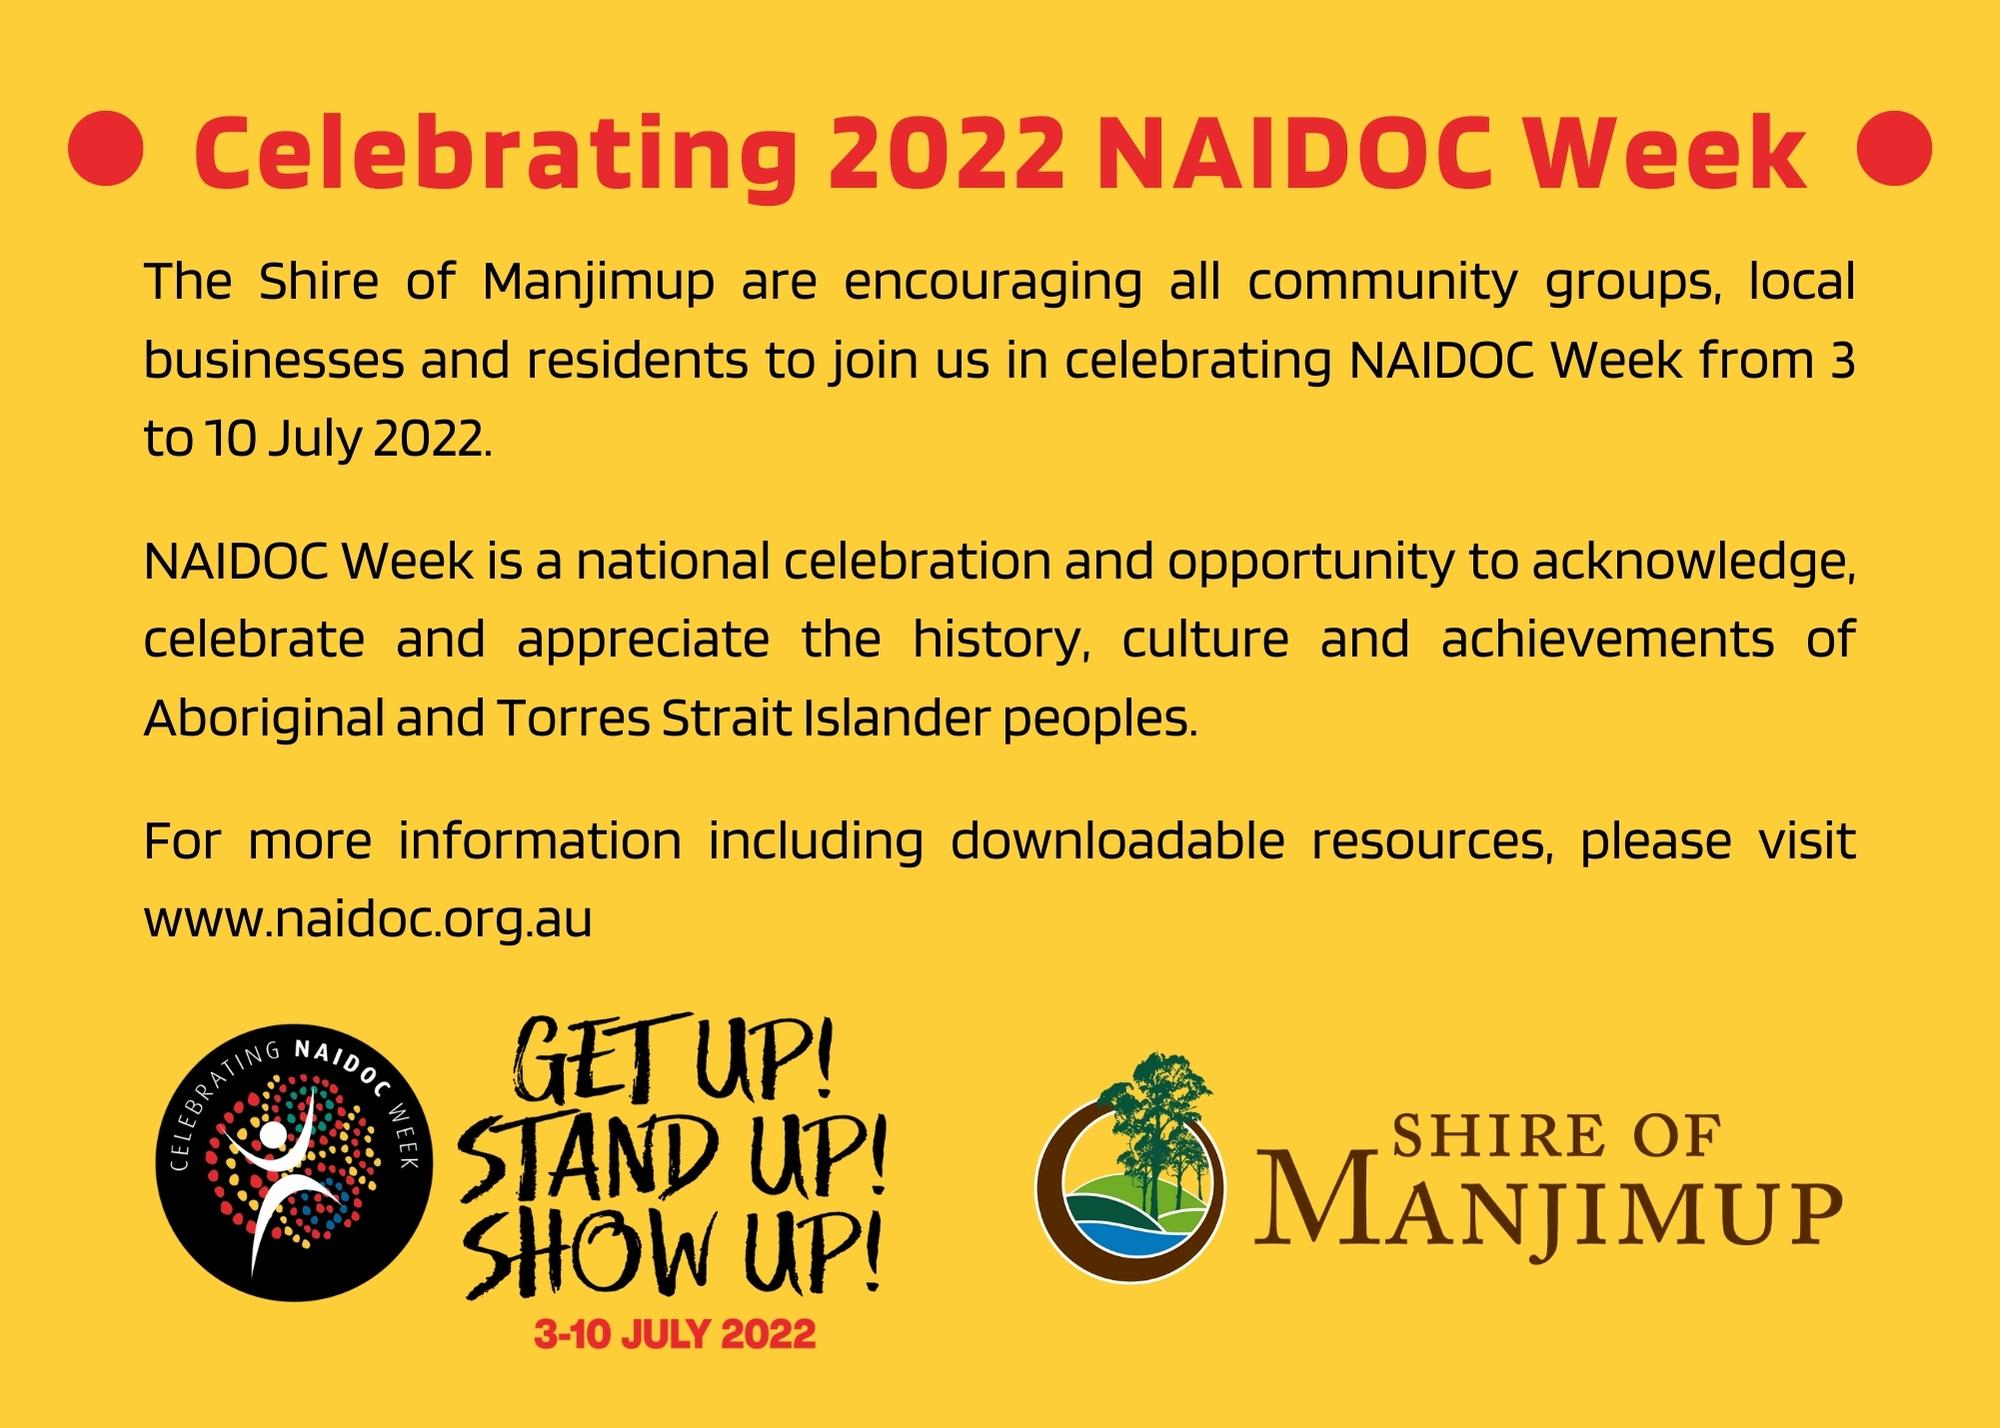 NAIDOC image requesting businesses to celebrate NAIDOC Week. Red and black on yellow background.